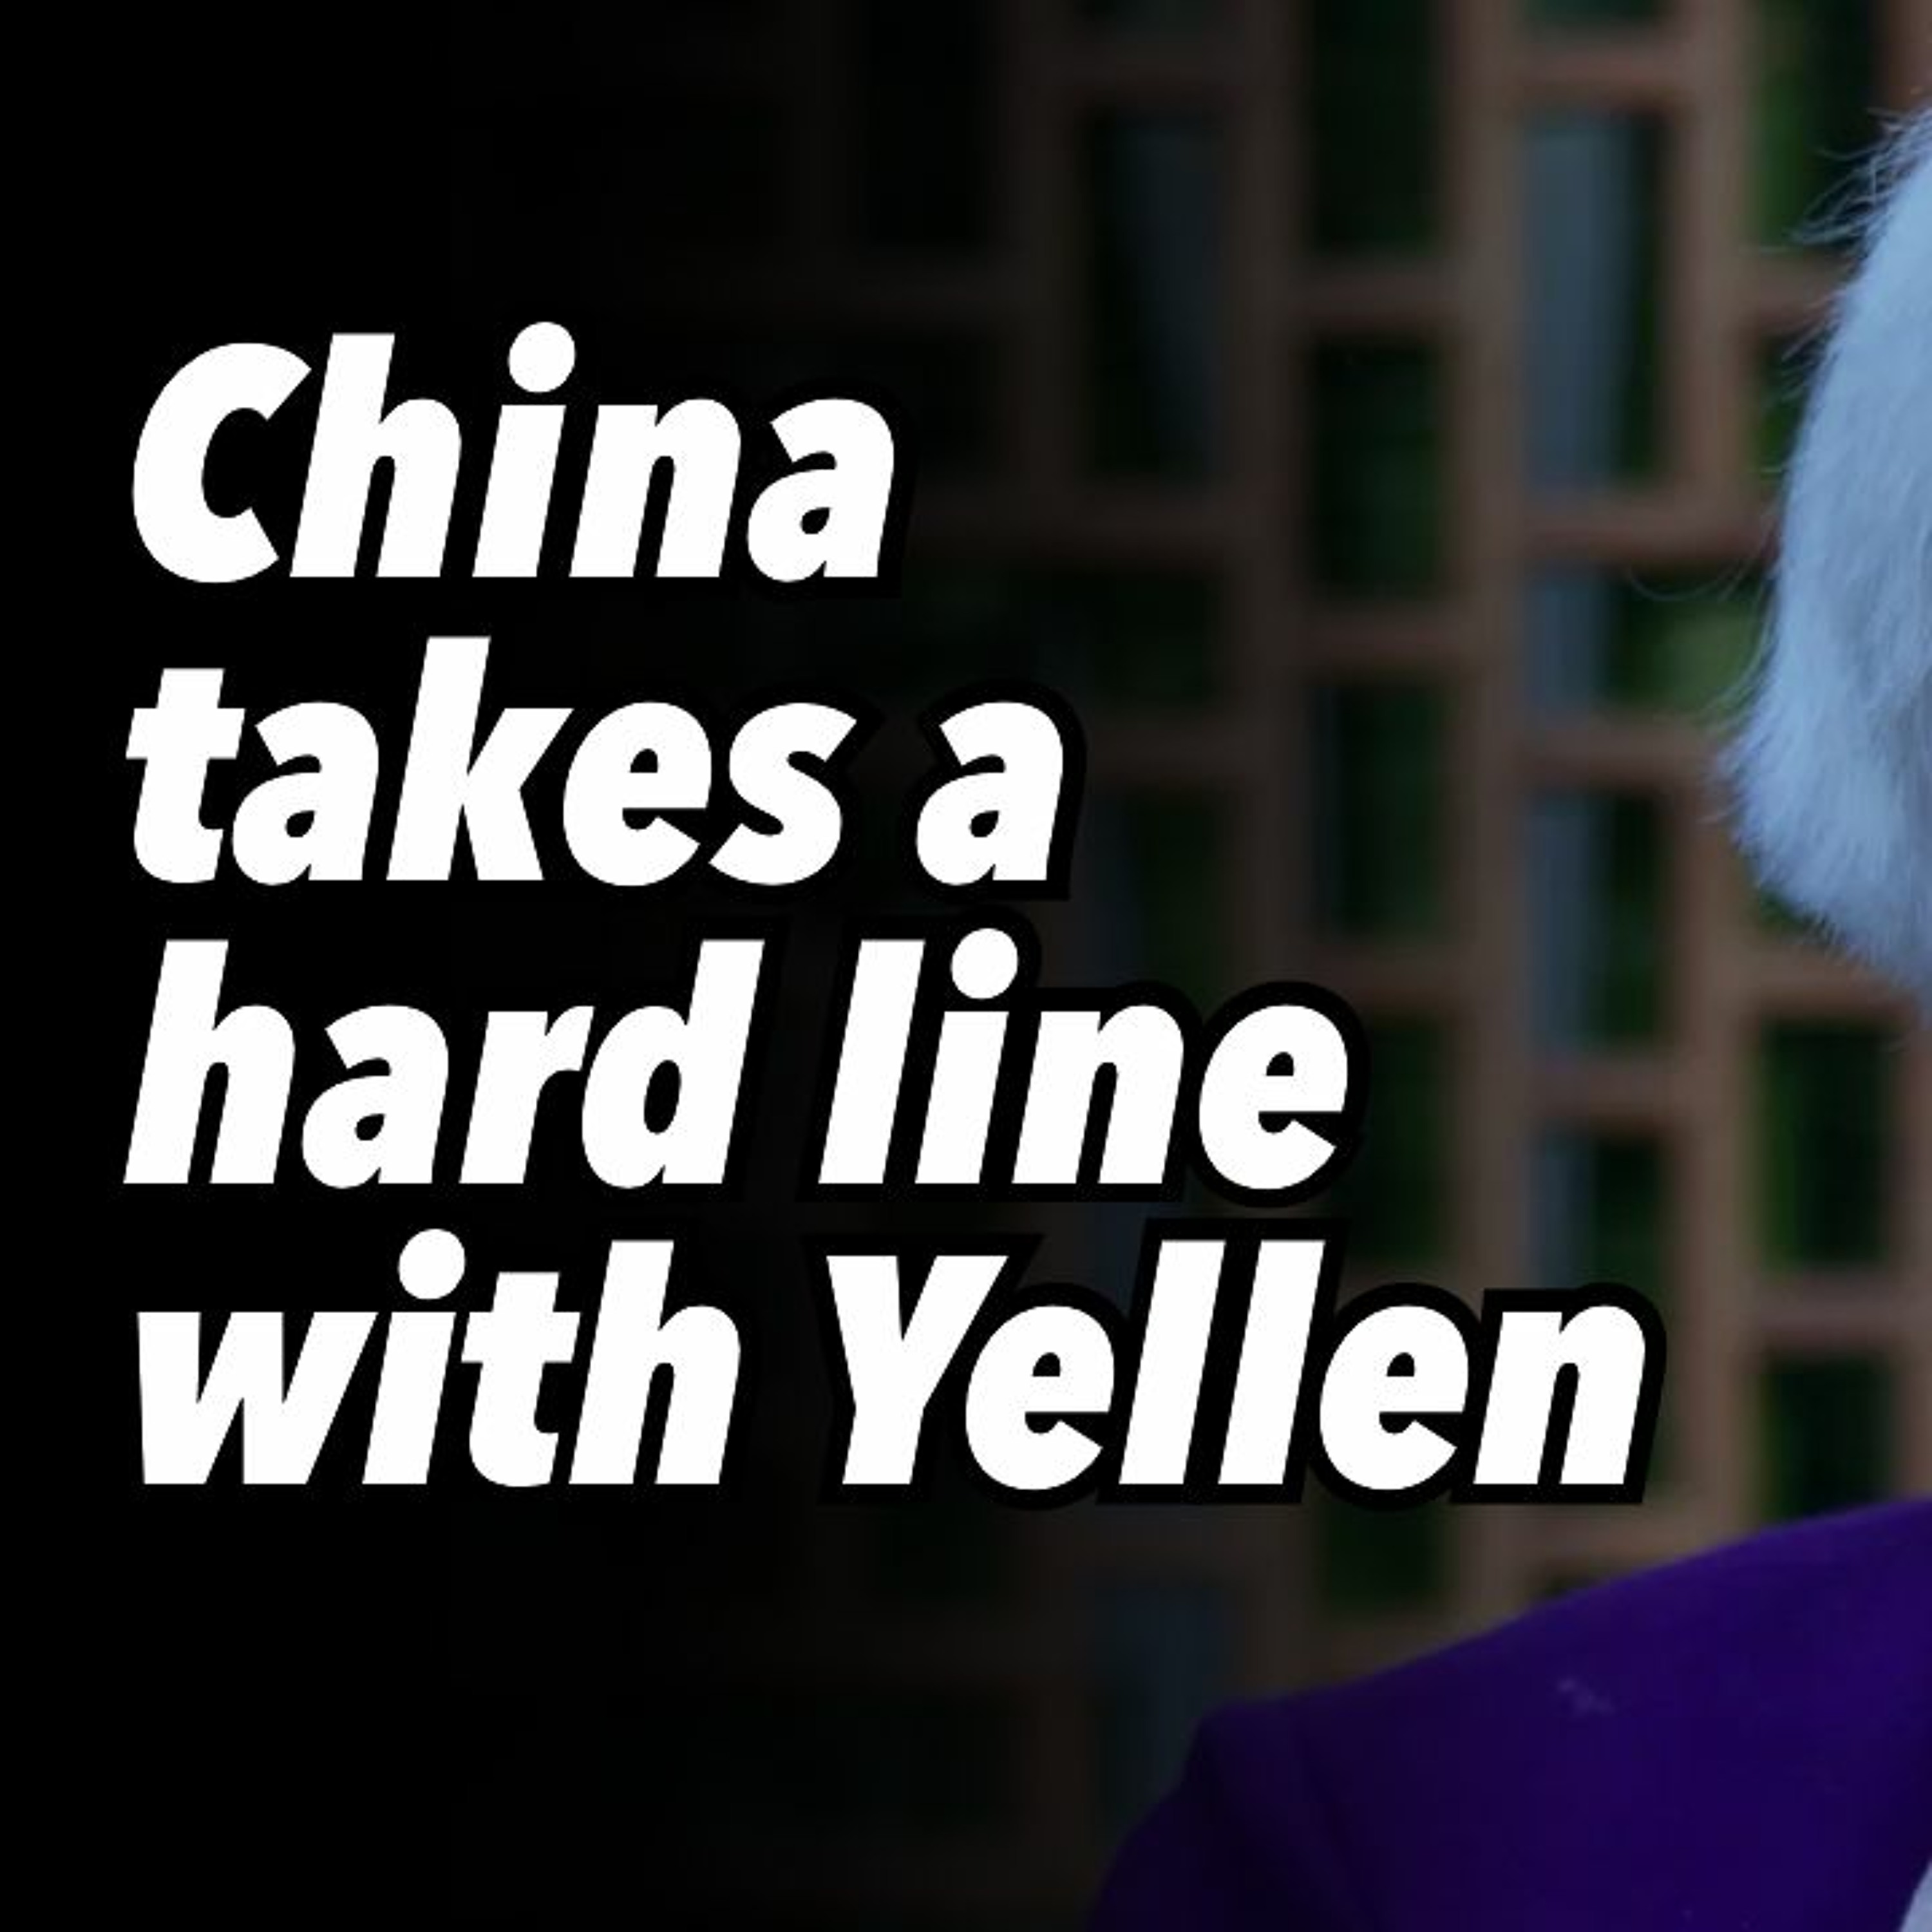 China takes a hard line with Yellen